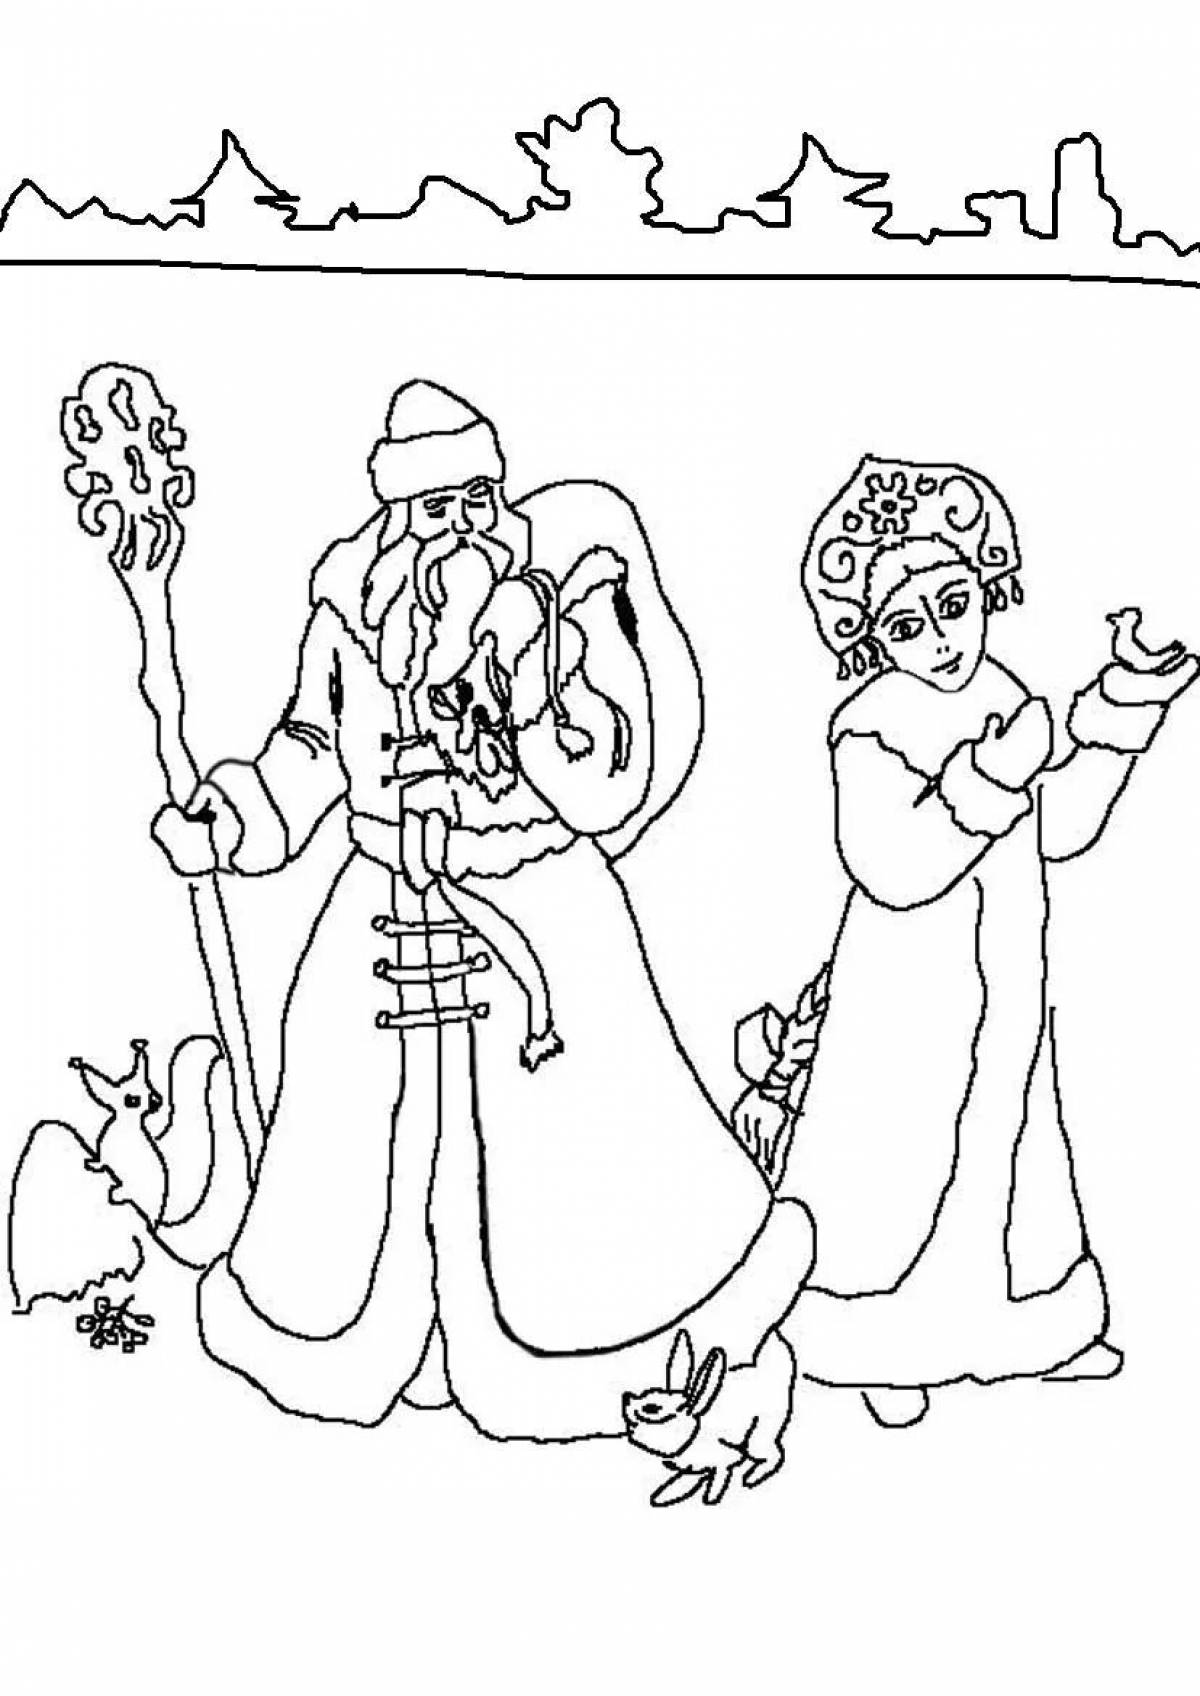 Bright drawing of Santa Claus and Snow Maiden